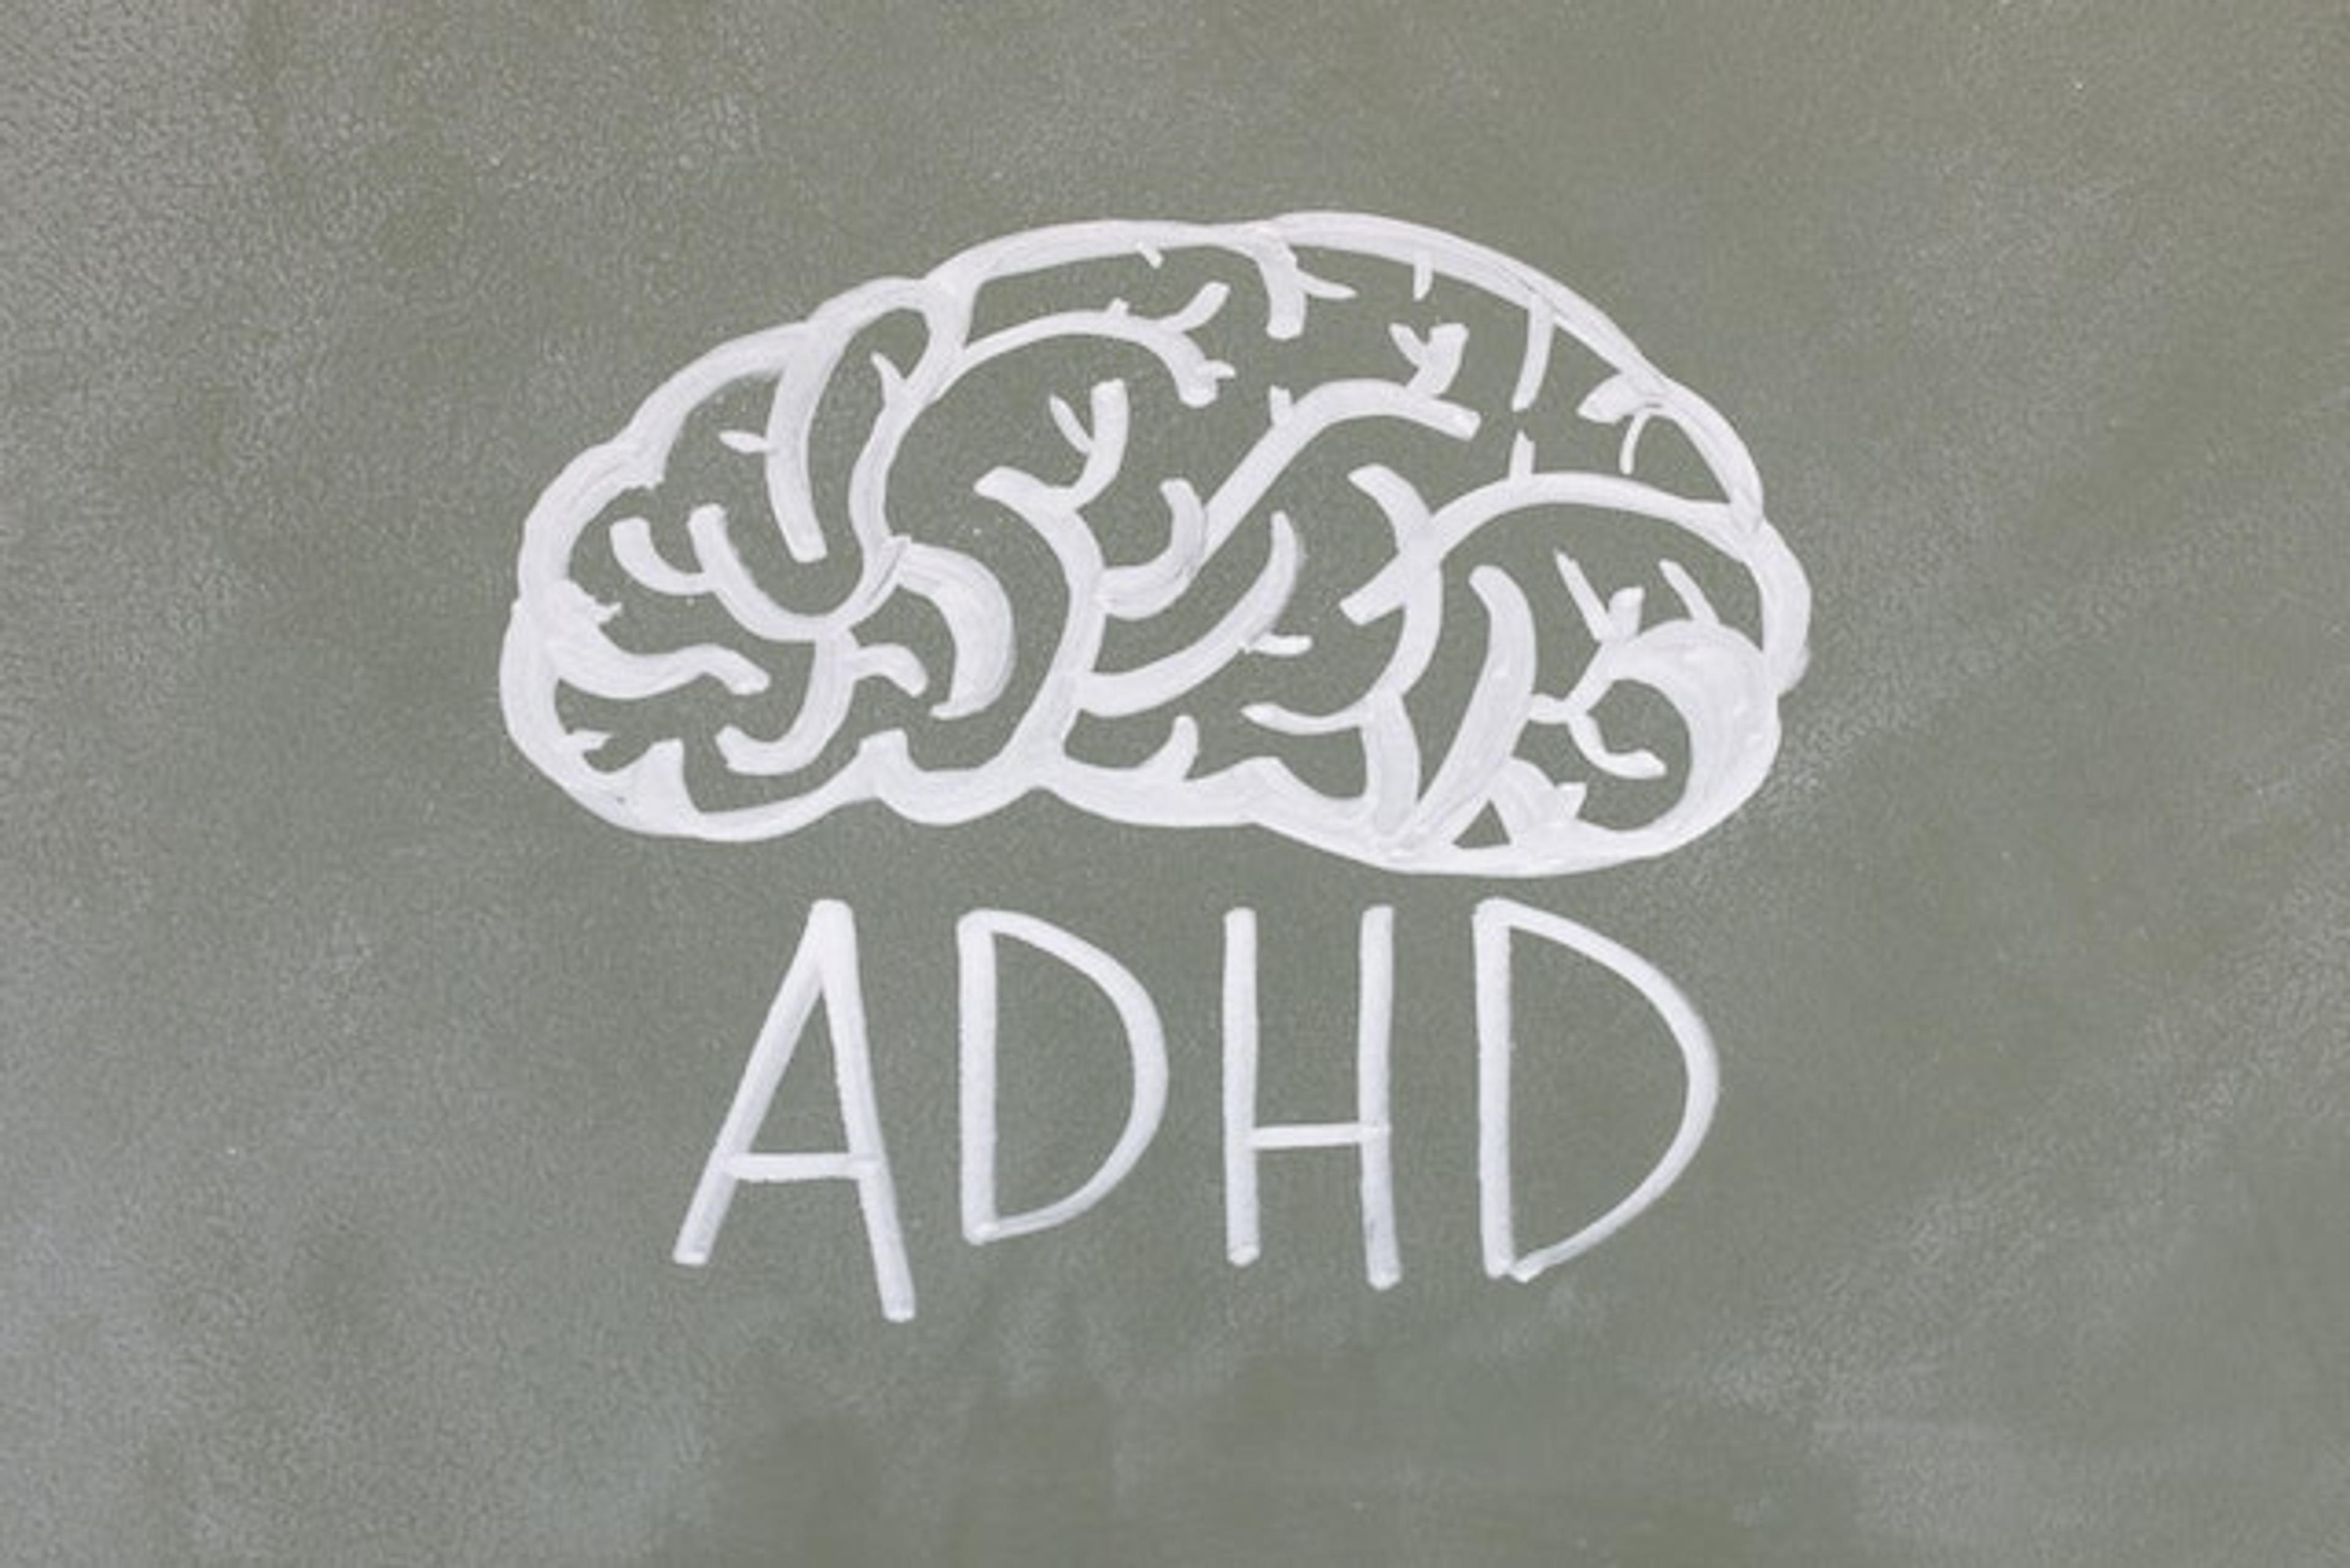 A painted brain and the text adhd, the picture is Illustrating adhd and relationship problems